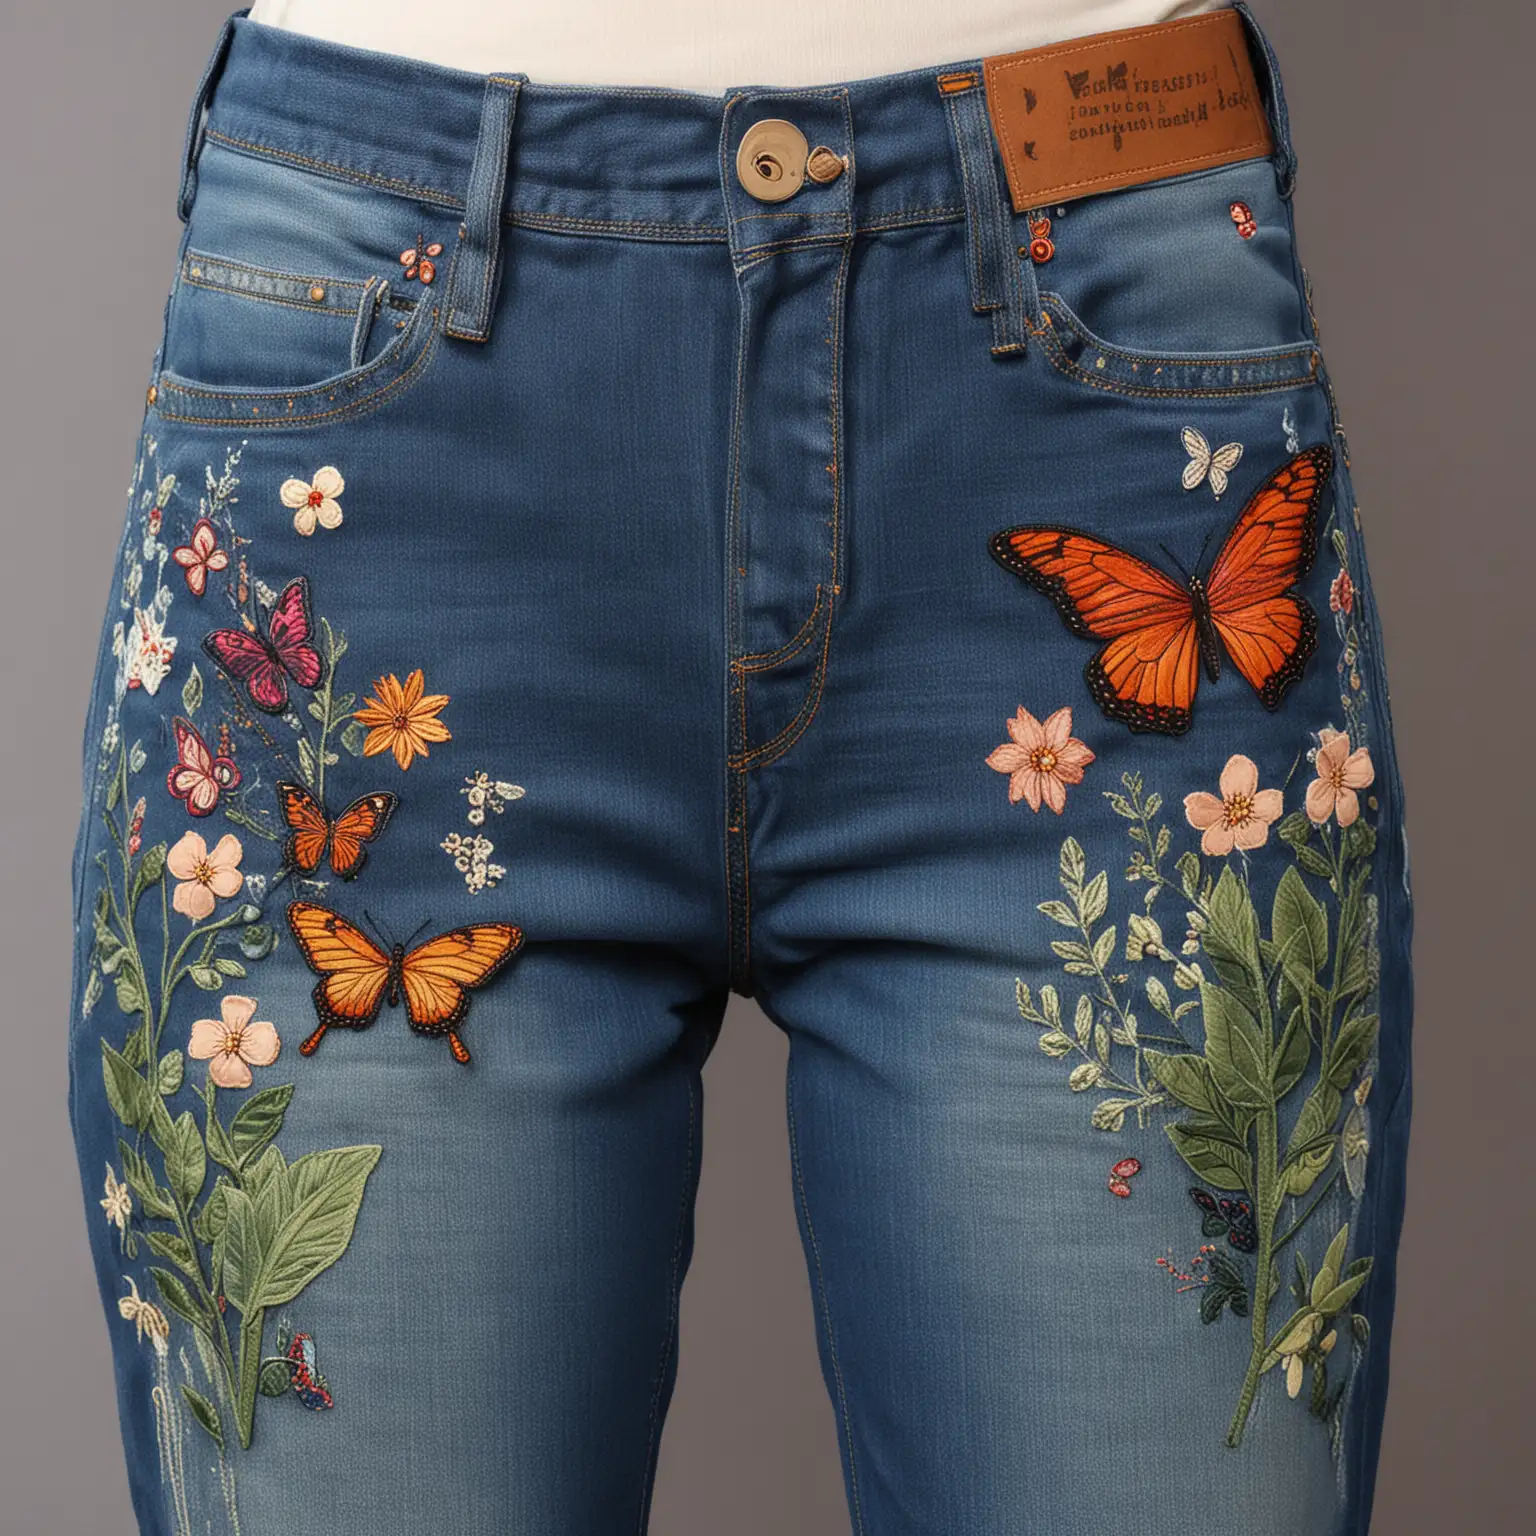 Womens Denim Jeans with Applique Butterfly and Plant Patchwork